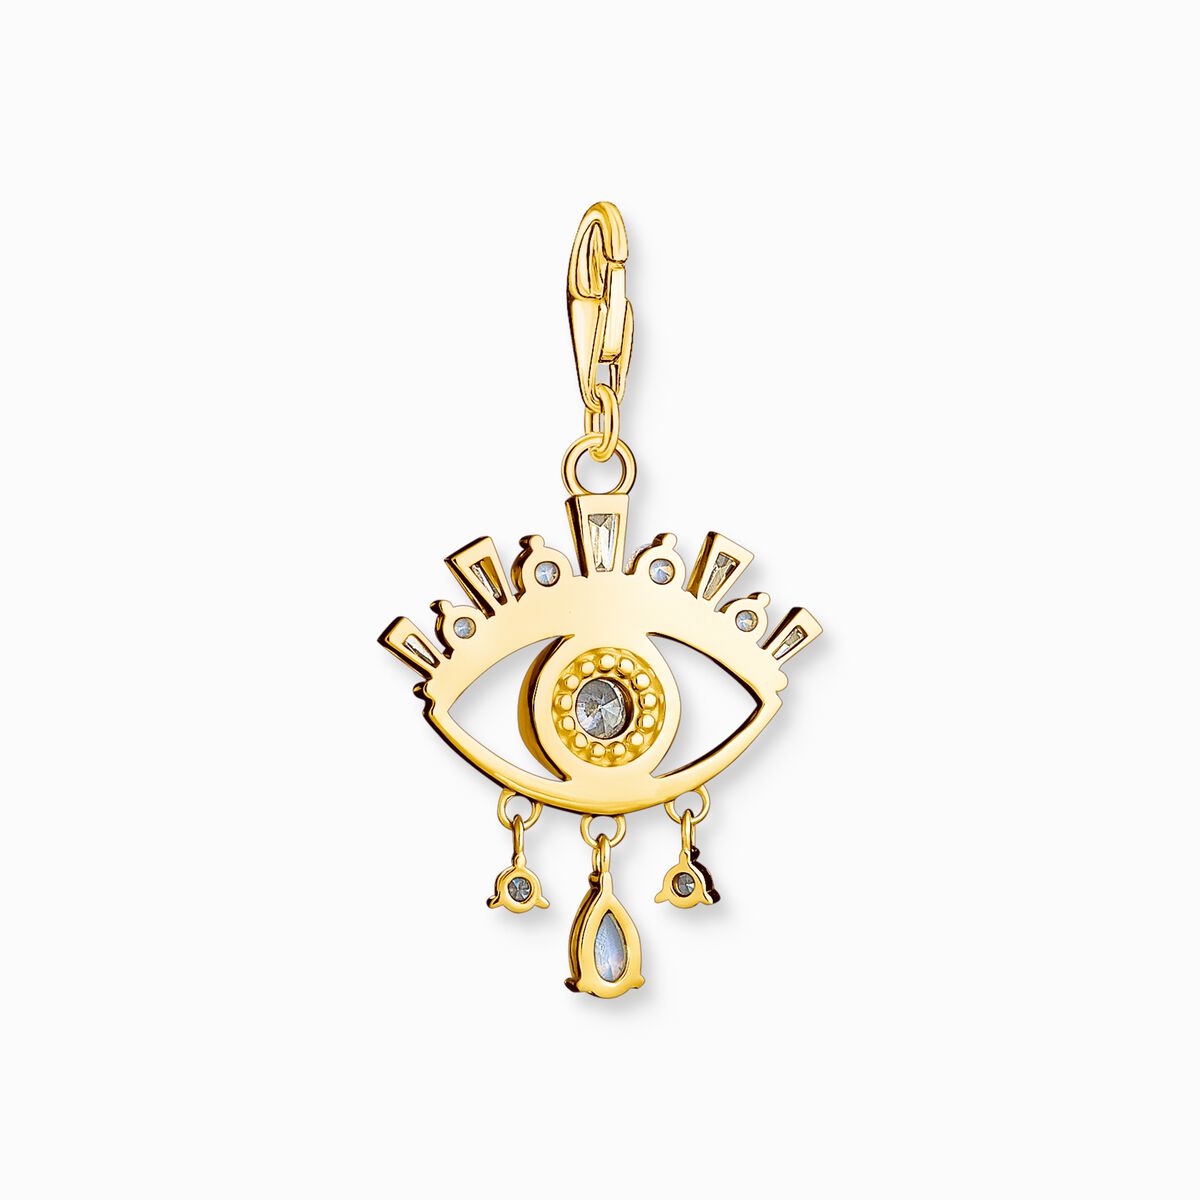 Charm, gold plated: Nazar's eye with stone setting